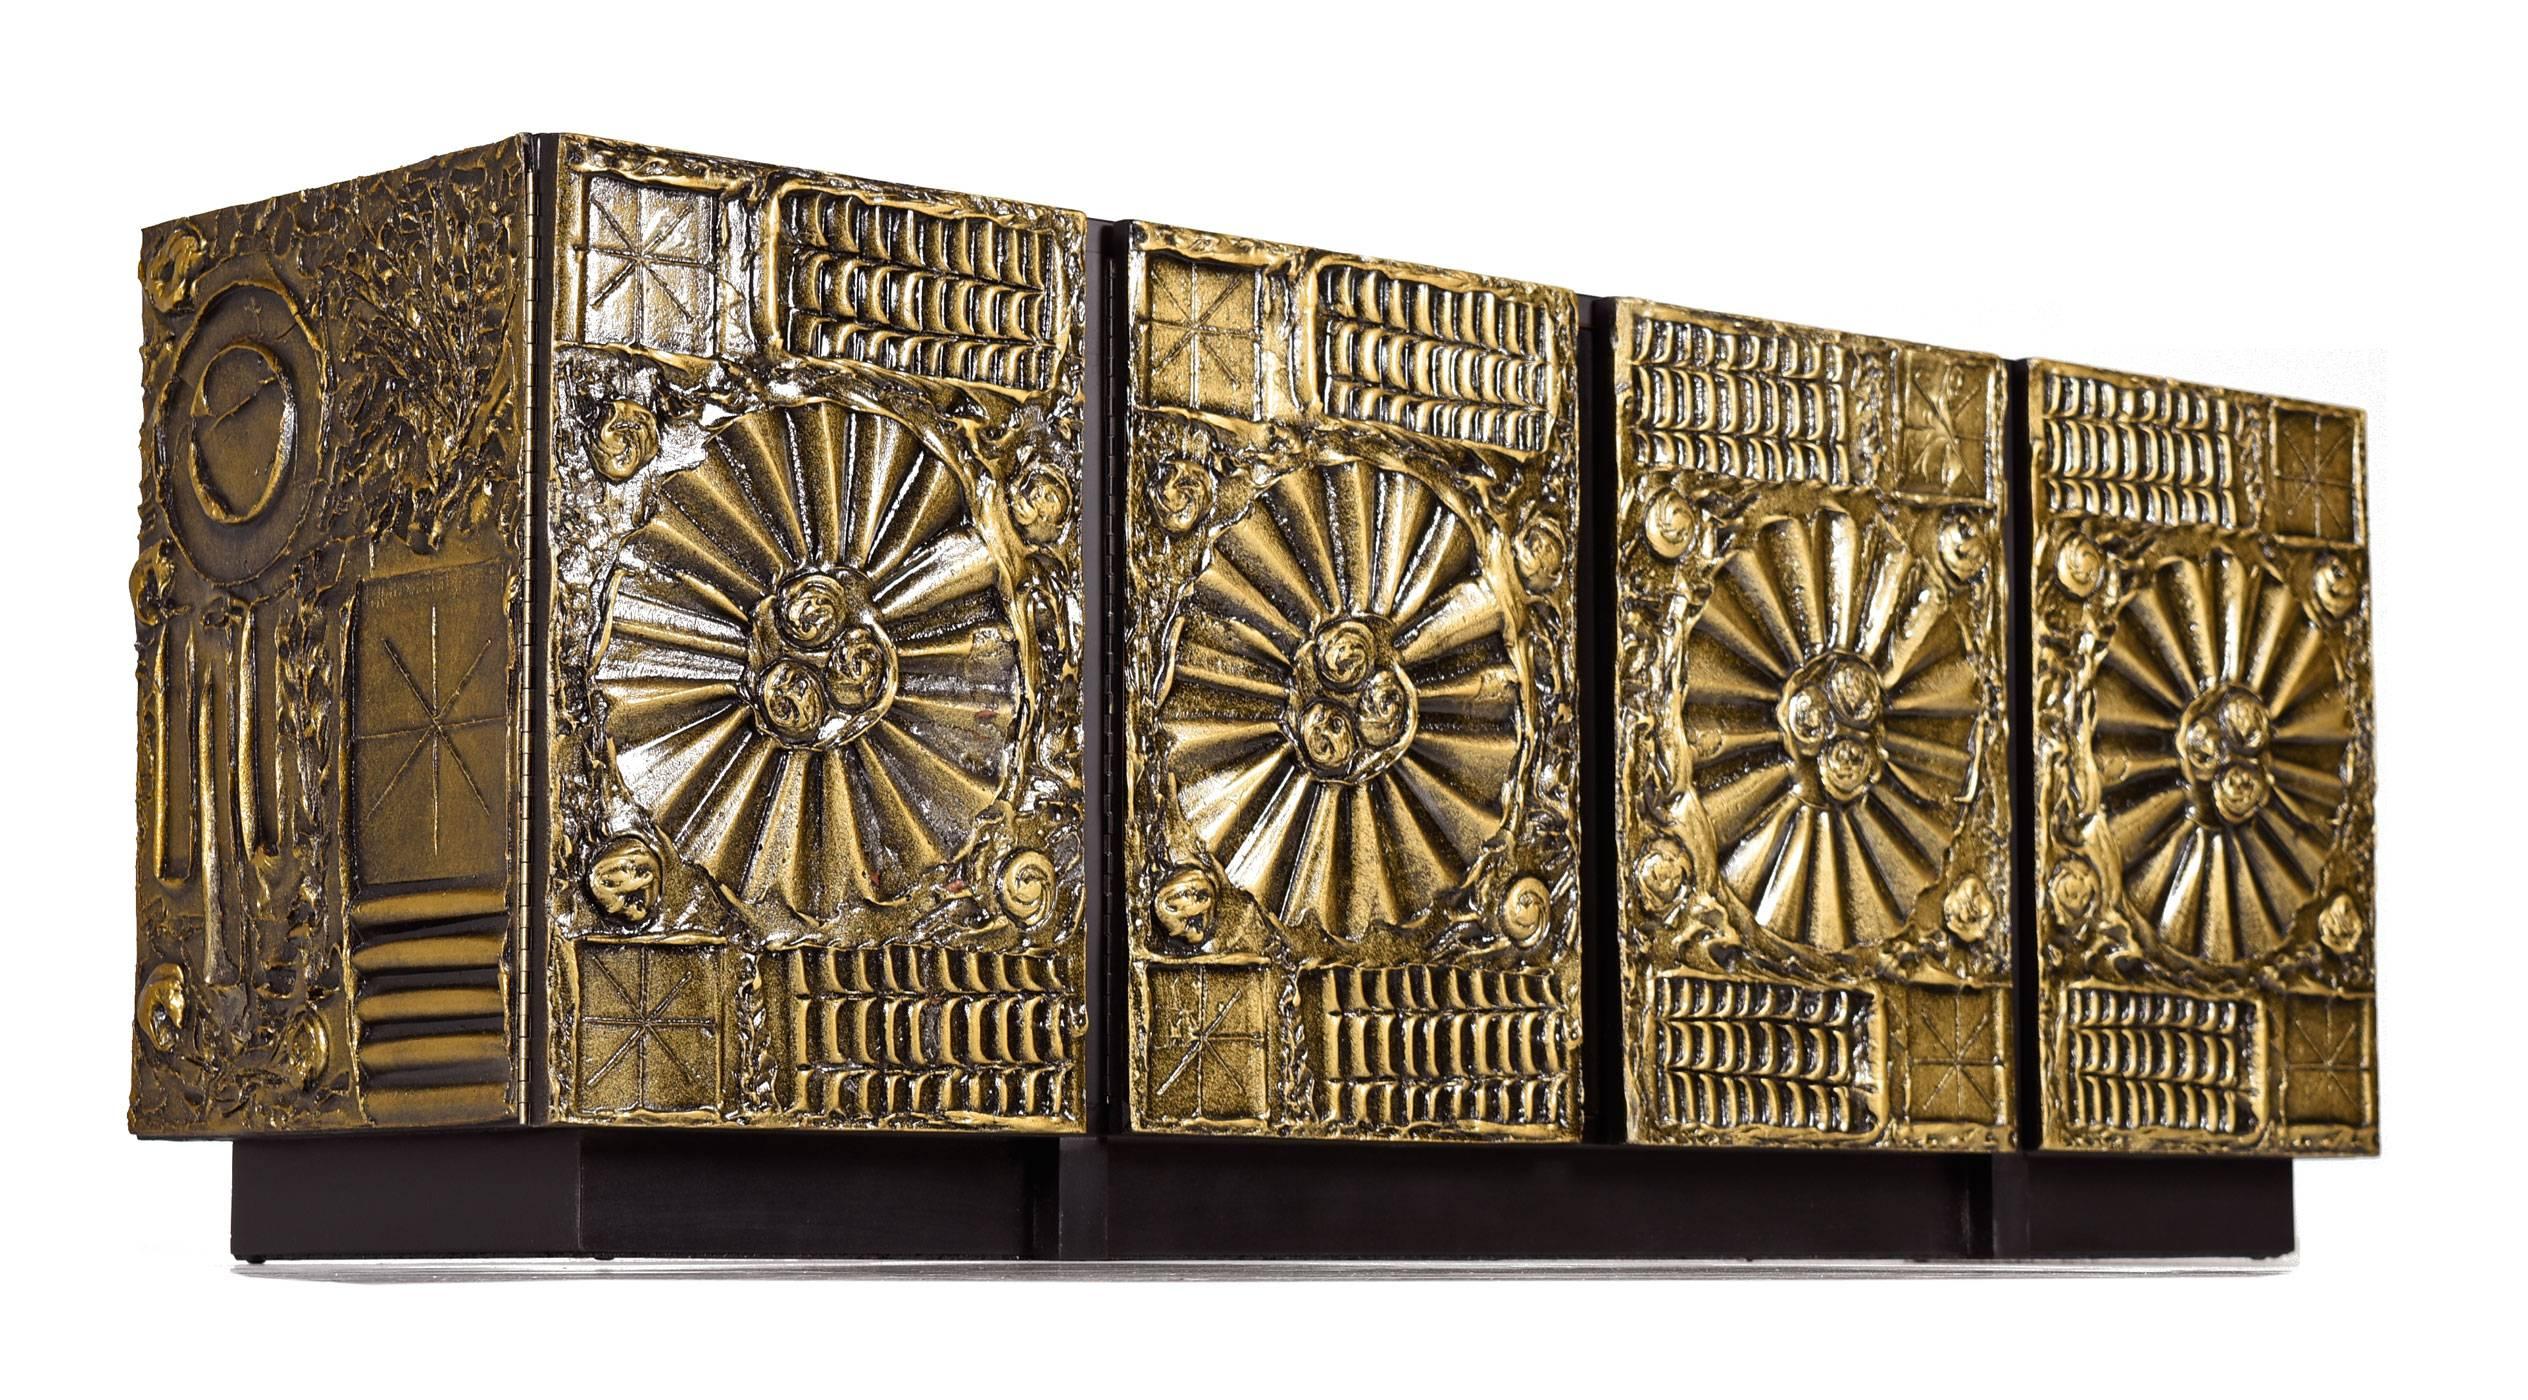 Impressive and rare Adrian Pearsall for Lane credenza. This large, four door credenza features resin carvings highlighted in gold in the style of Paul Evans. All four doors pop open to reveal large storage cabinets, the outside cabinets feature a